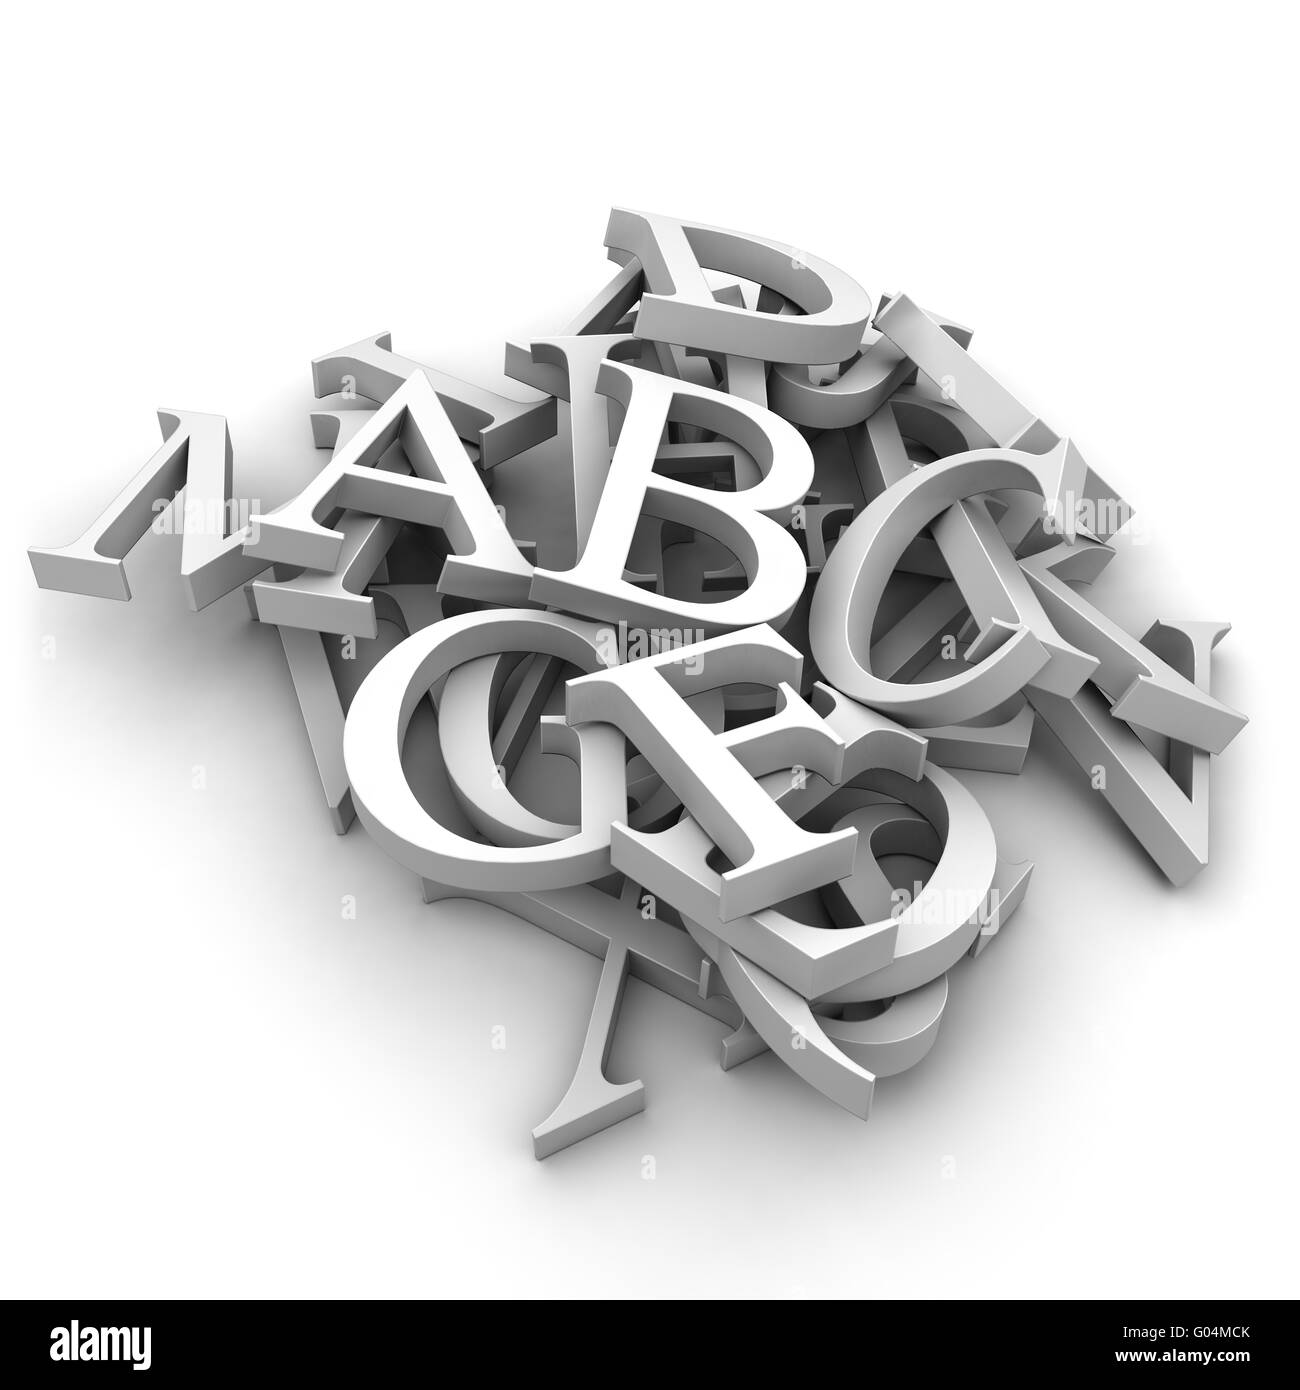 Alphabet letters poured in a heap Stock Photo